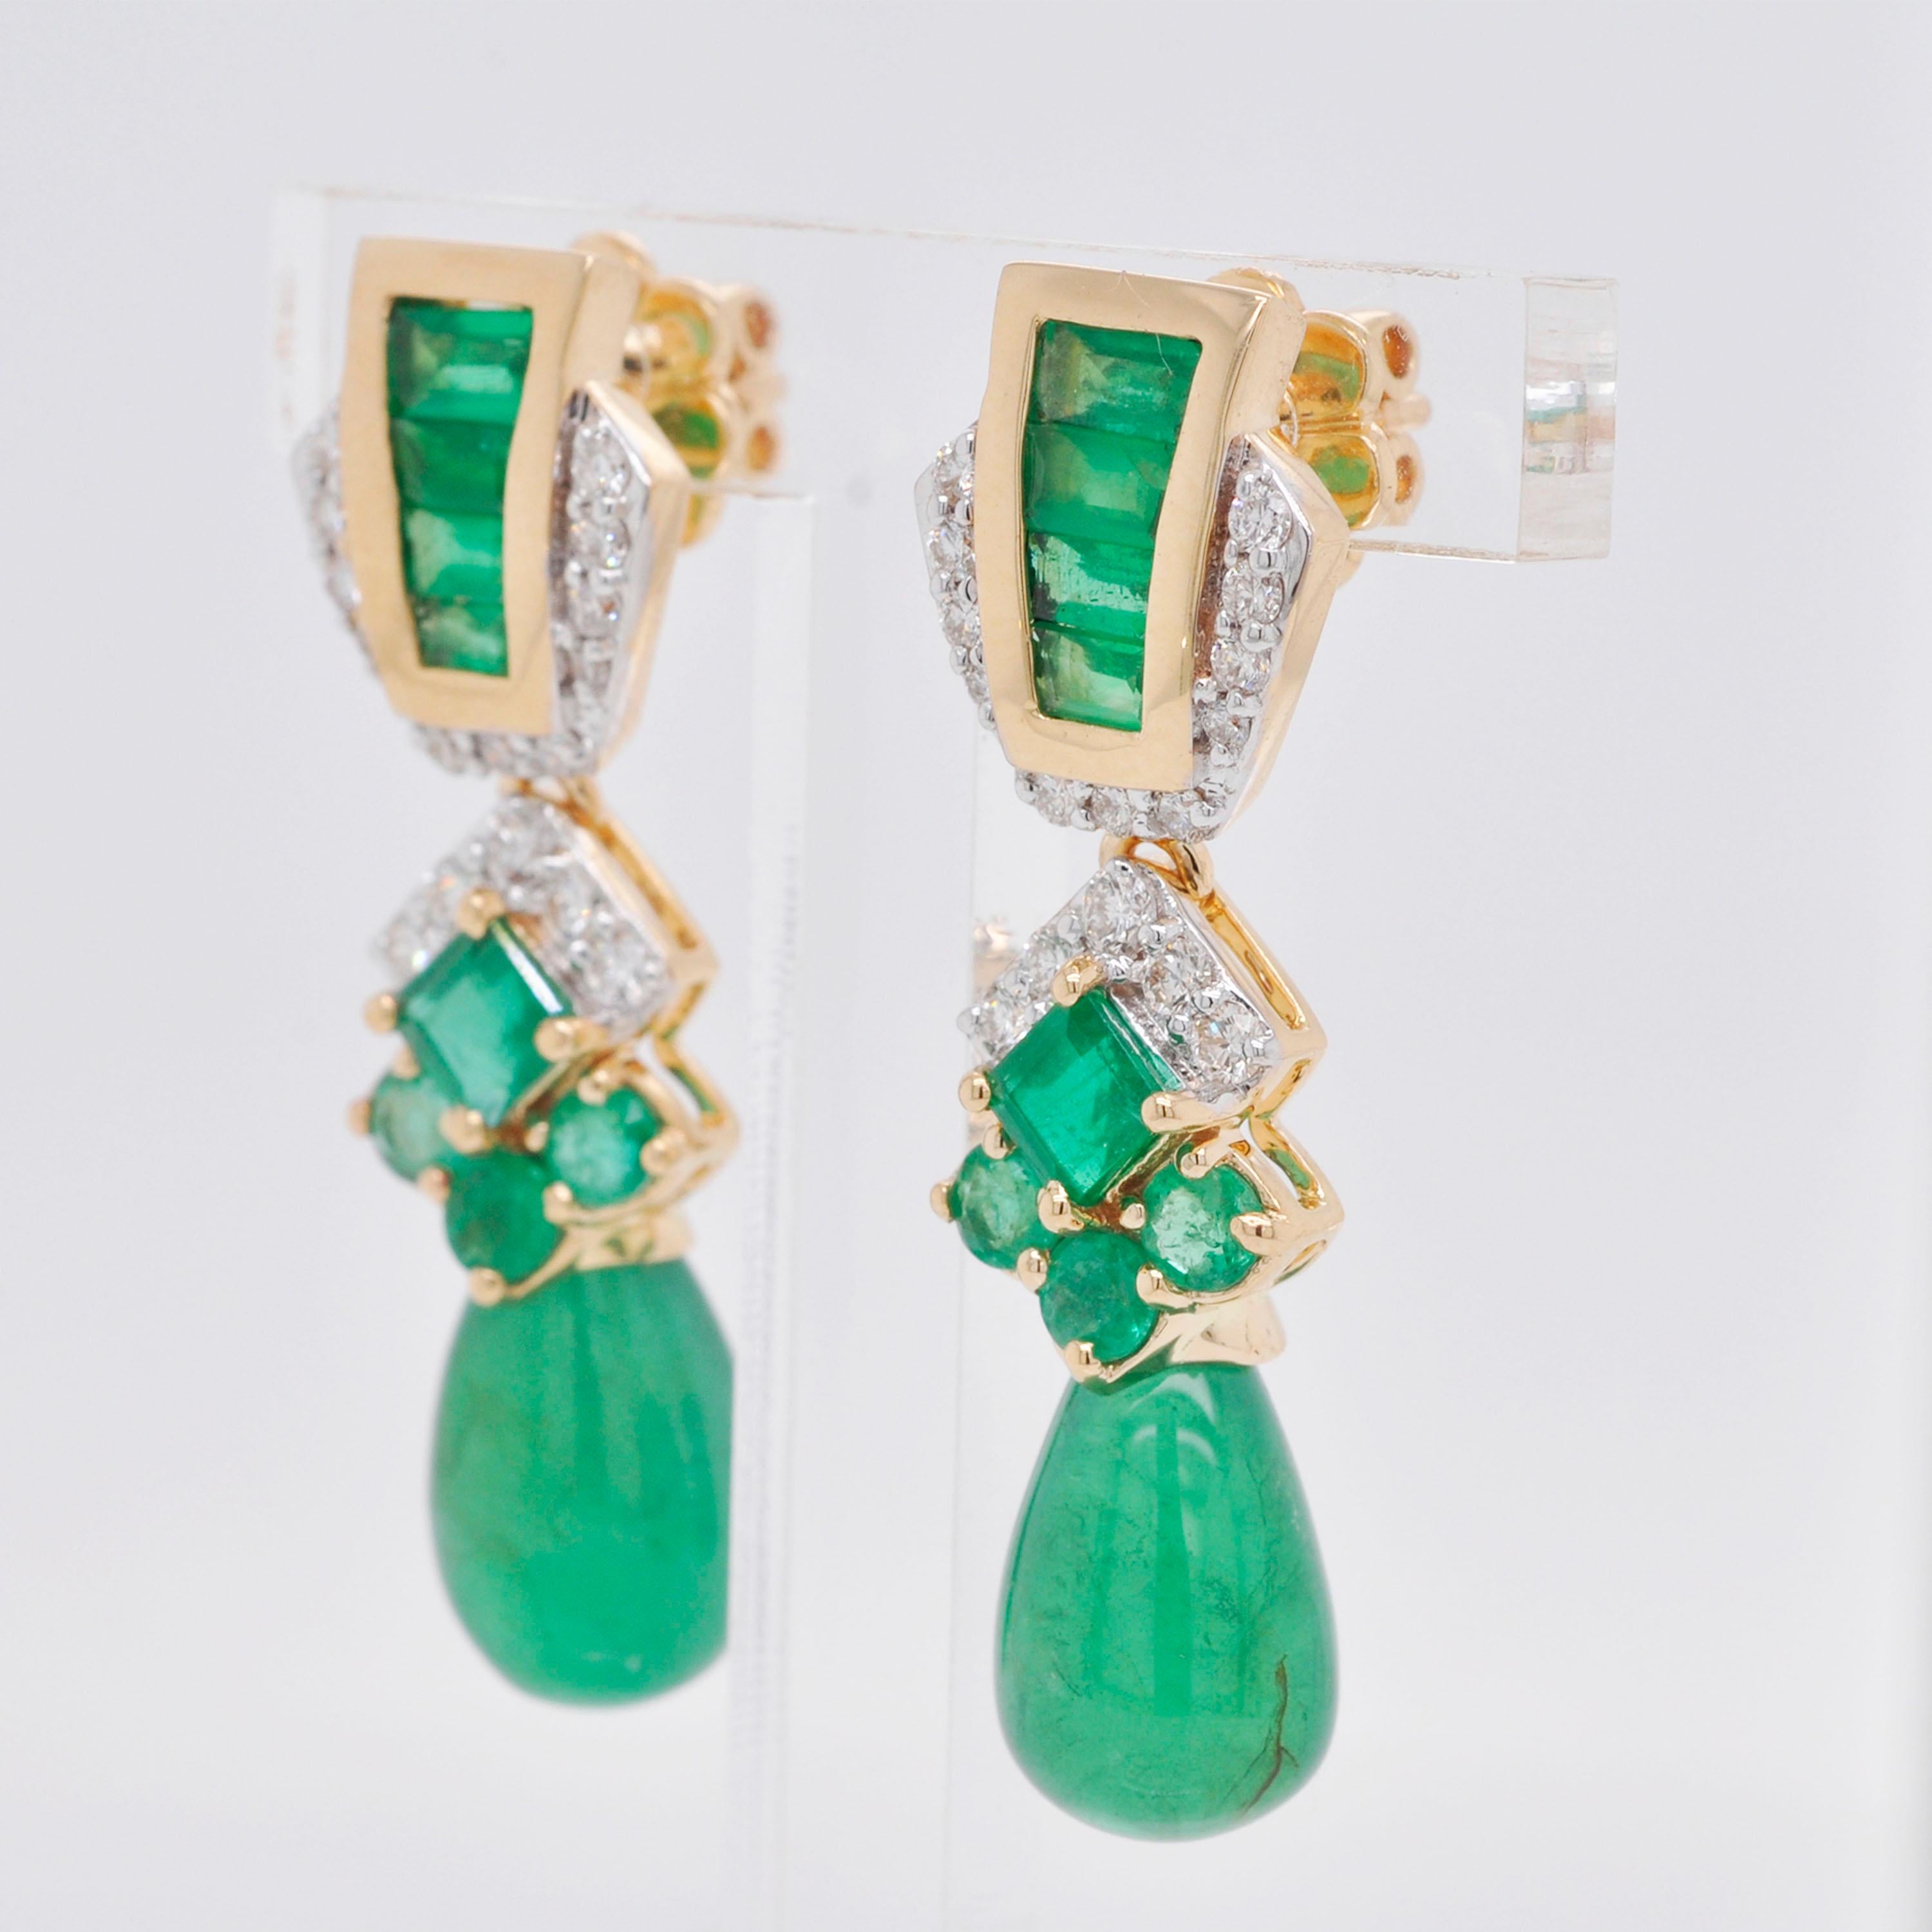 18 karat gold emerald baguette emerald drop diamond dangler earrings.

This adorable and glamorous parakeet green emerald and drop earring is splendid. The formation of baguettes, squares, rounds and drop emeralds and diamonds in the side pave